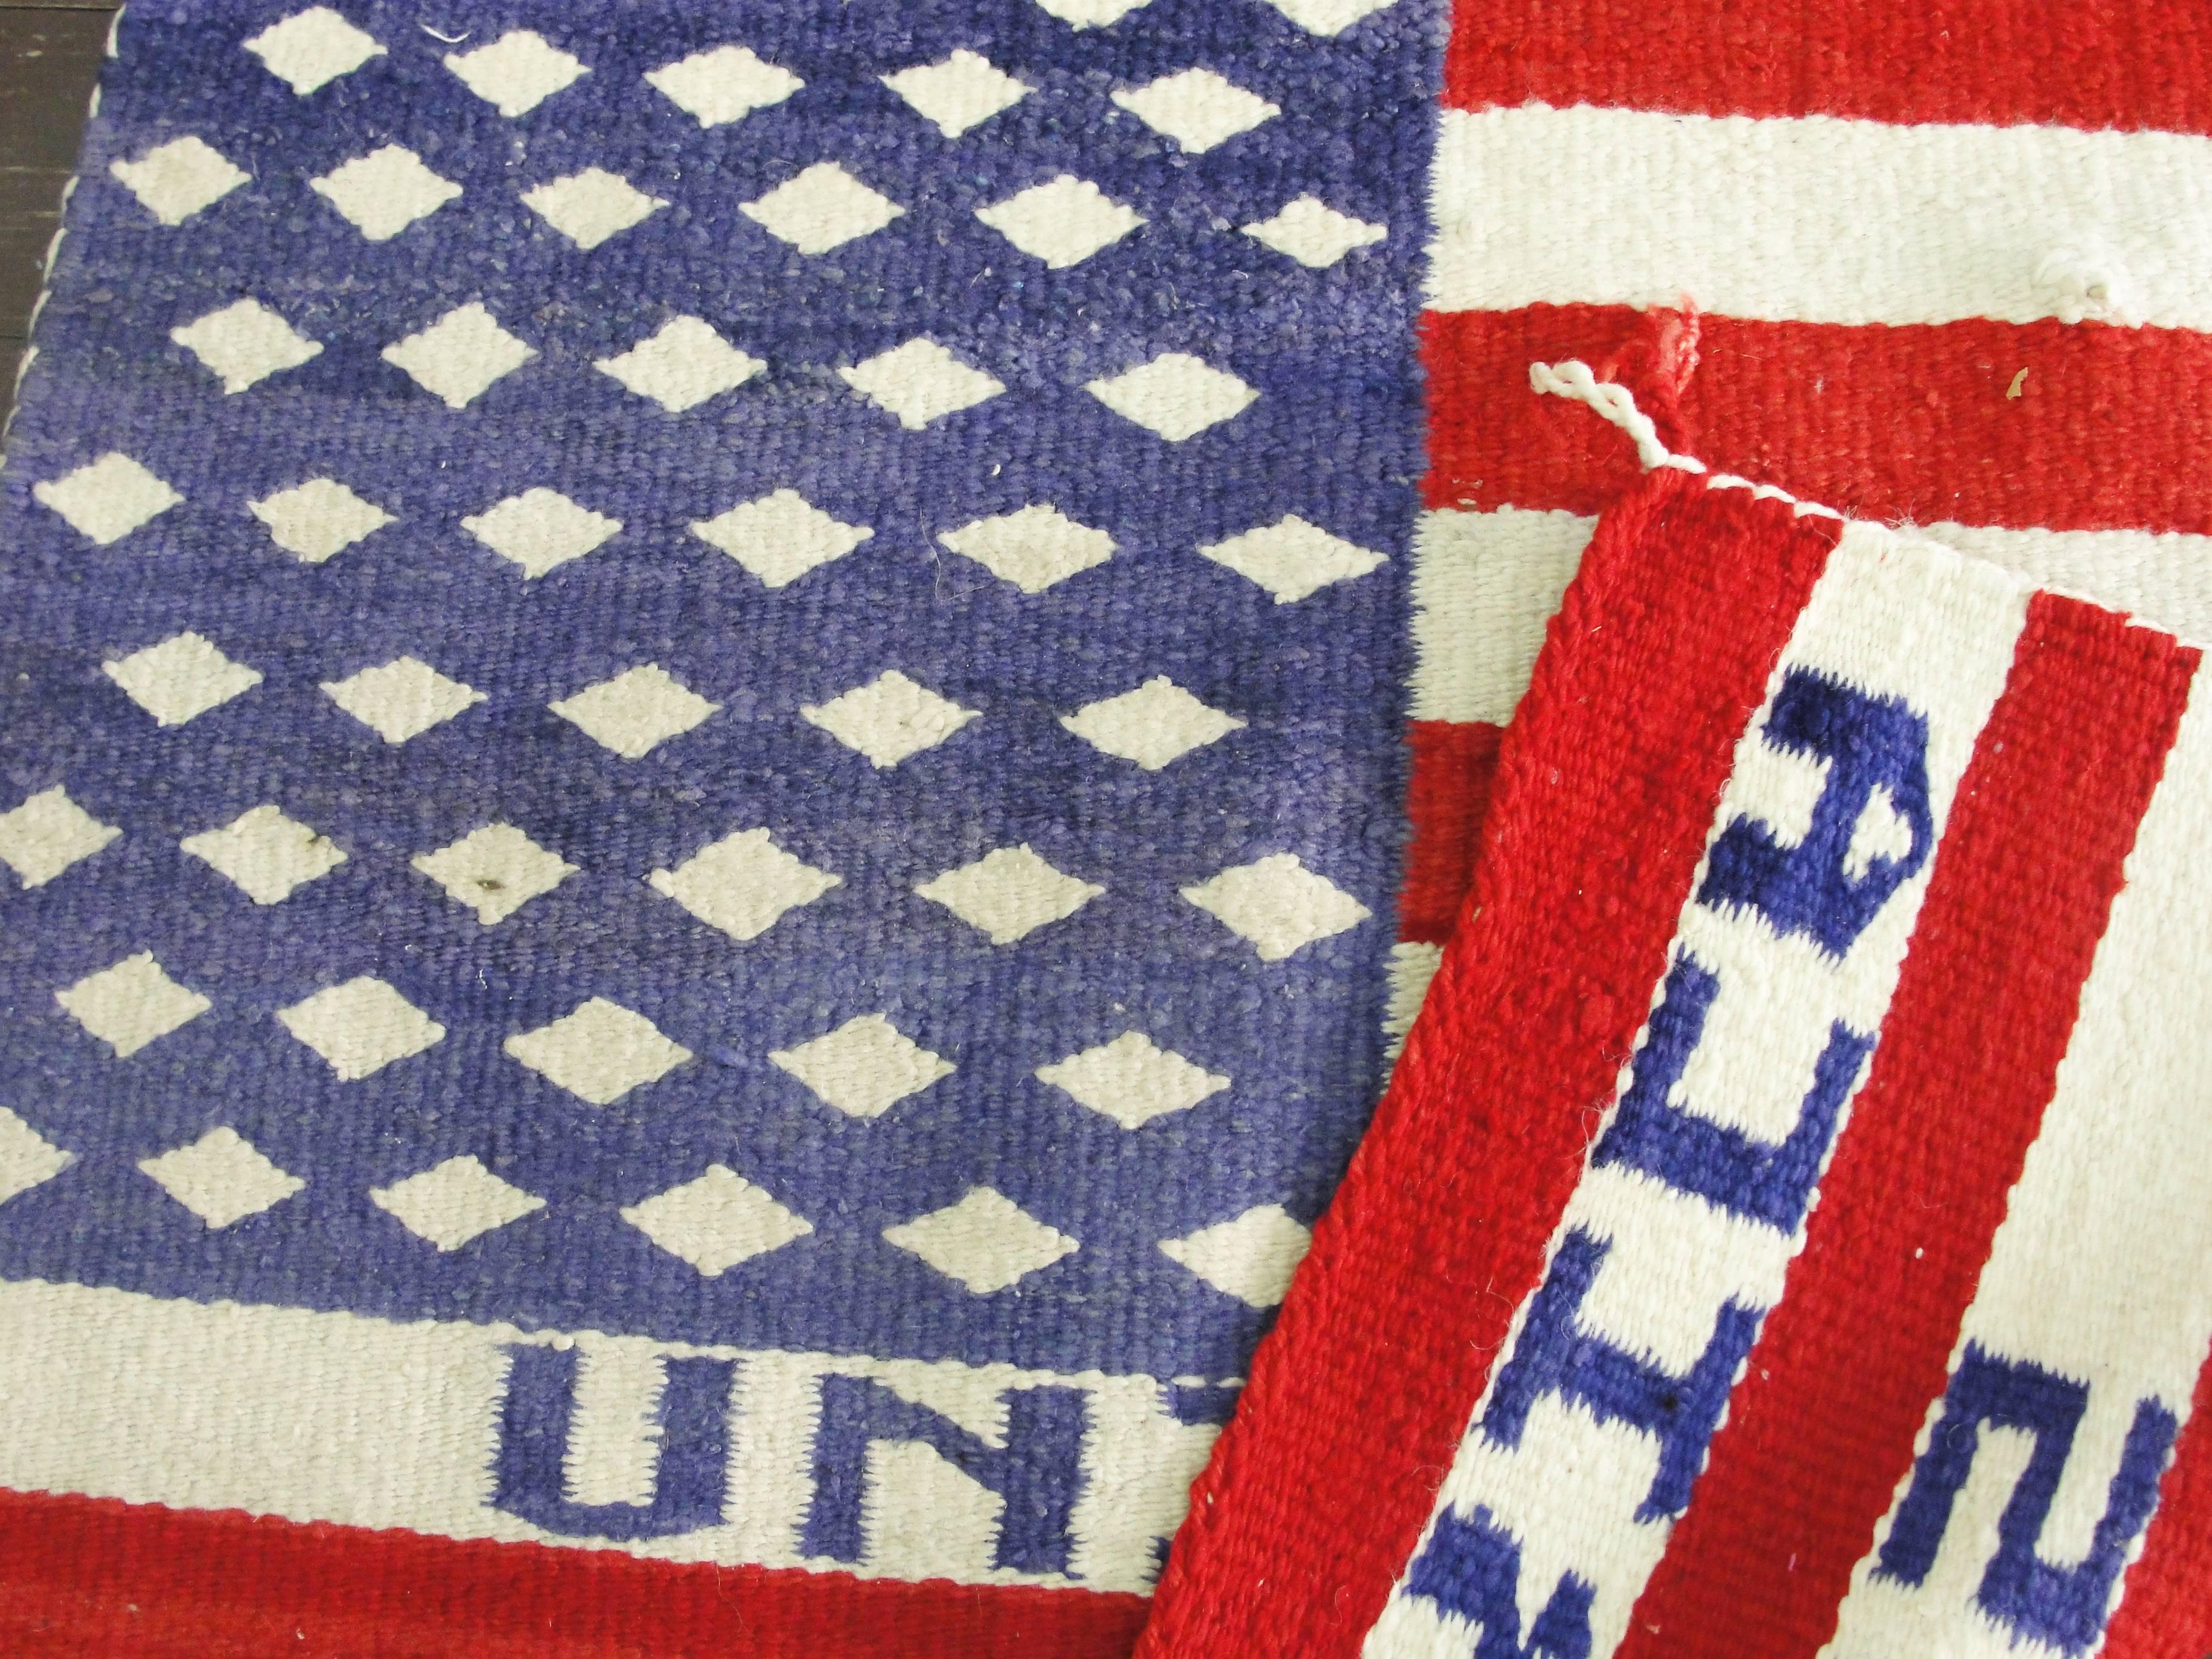 Pictorial Navajo rug depicting U.S. flag with 50 white diamonds representing the stars on a bluish/purple field with red and white stripes. United States of America woven into the red and white strips.